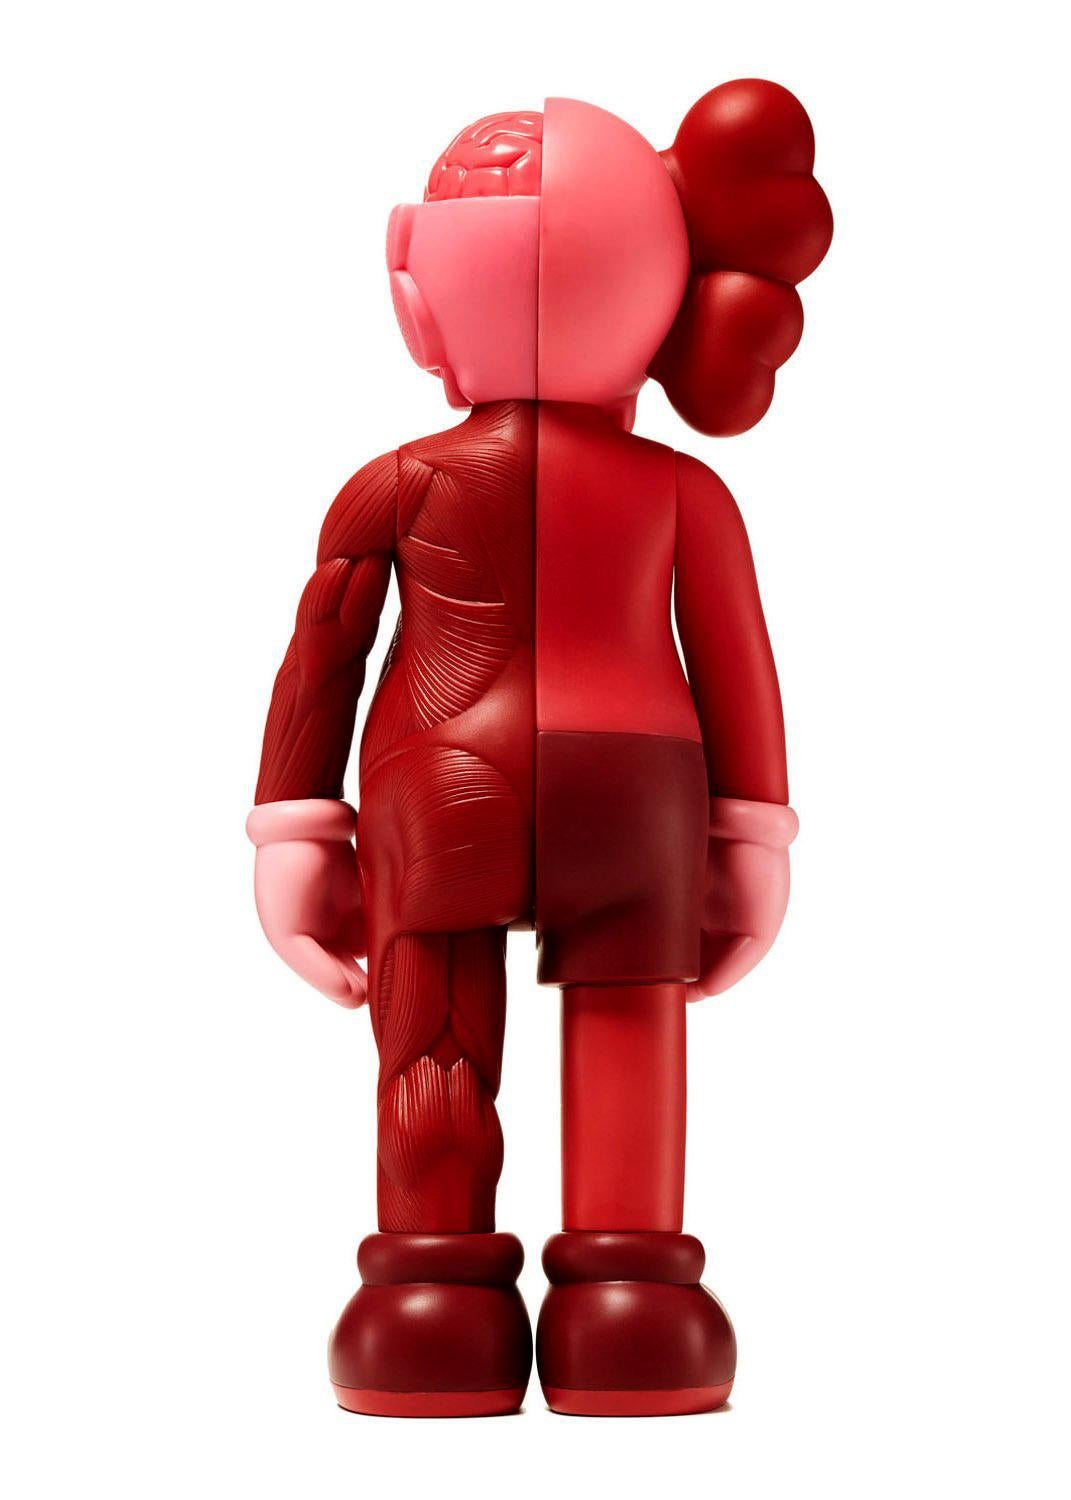 KAWS Red Blush Companion 2016 (KAWS Flayed): New and sealed in its original packaging. Published by Medicom Japan in conjunction with the exhibition, KAWS: Where The End Starts at the Modern Art Museum of Fort Worth. ThIs figurine has since well